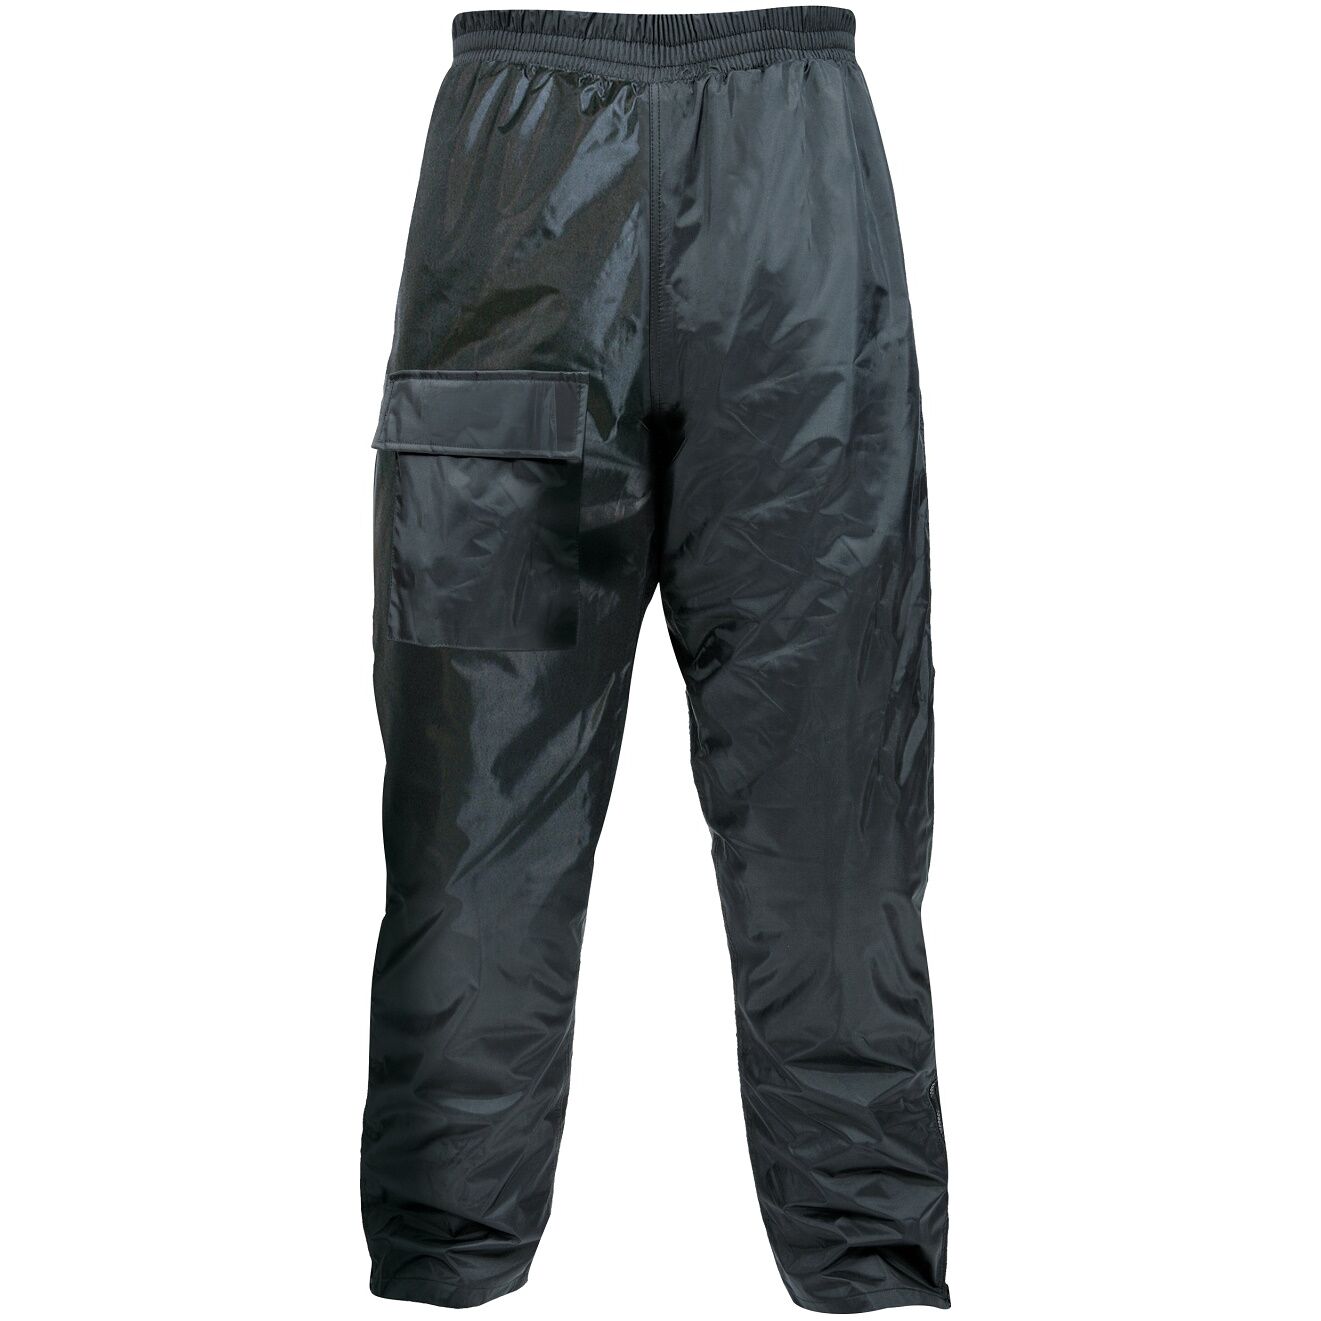 Weise Stratus Waterproof Jeans | FREE DELIVERY!